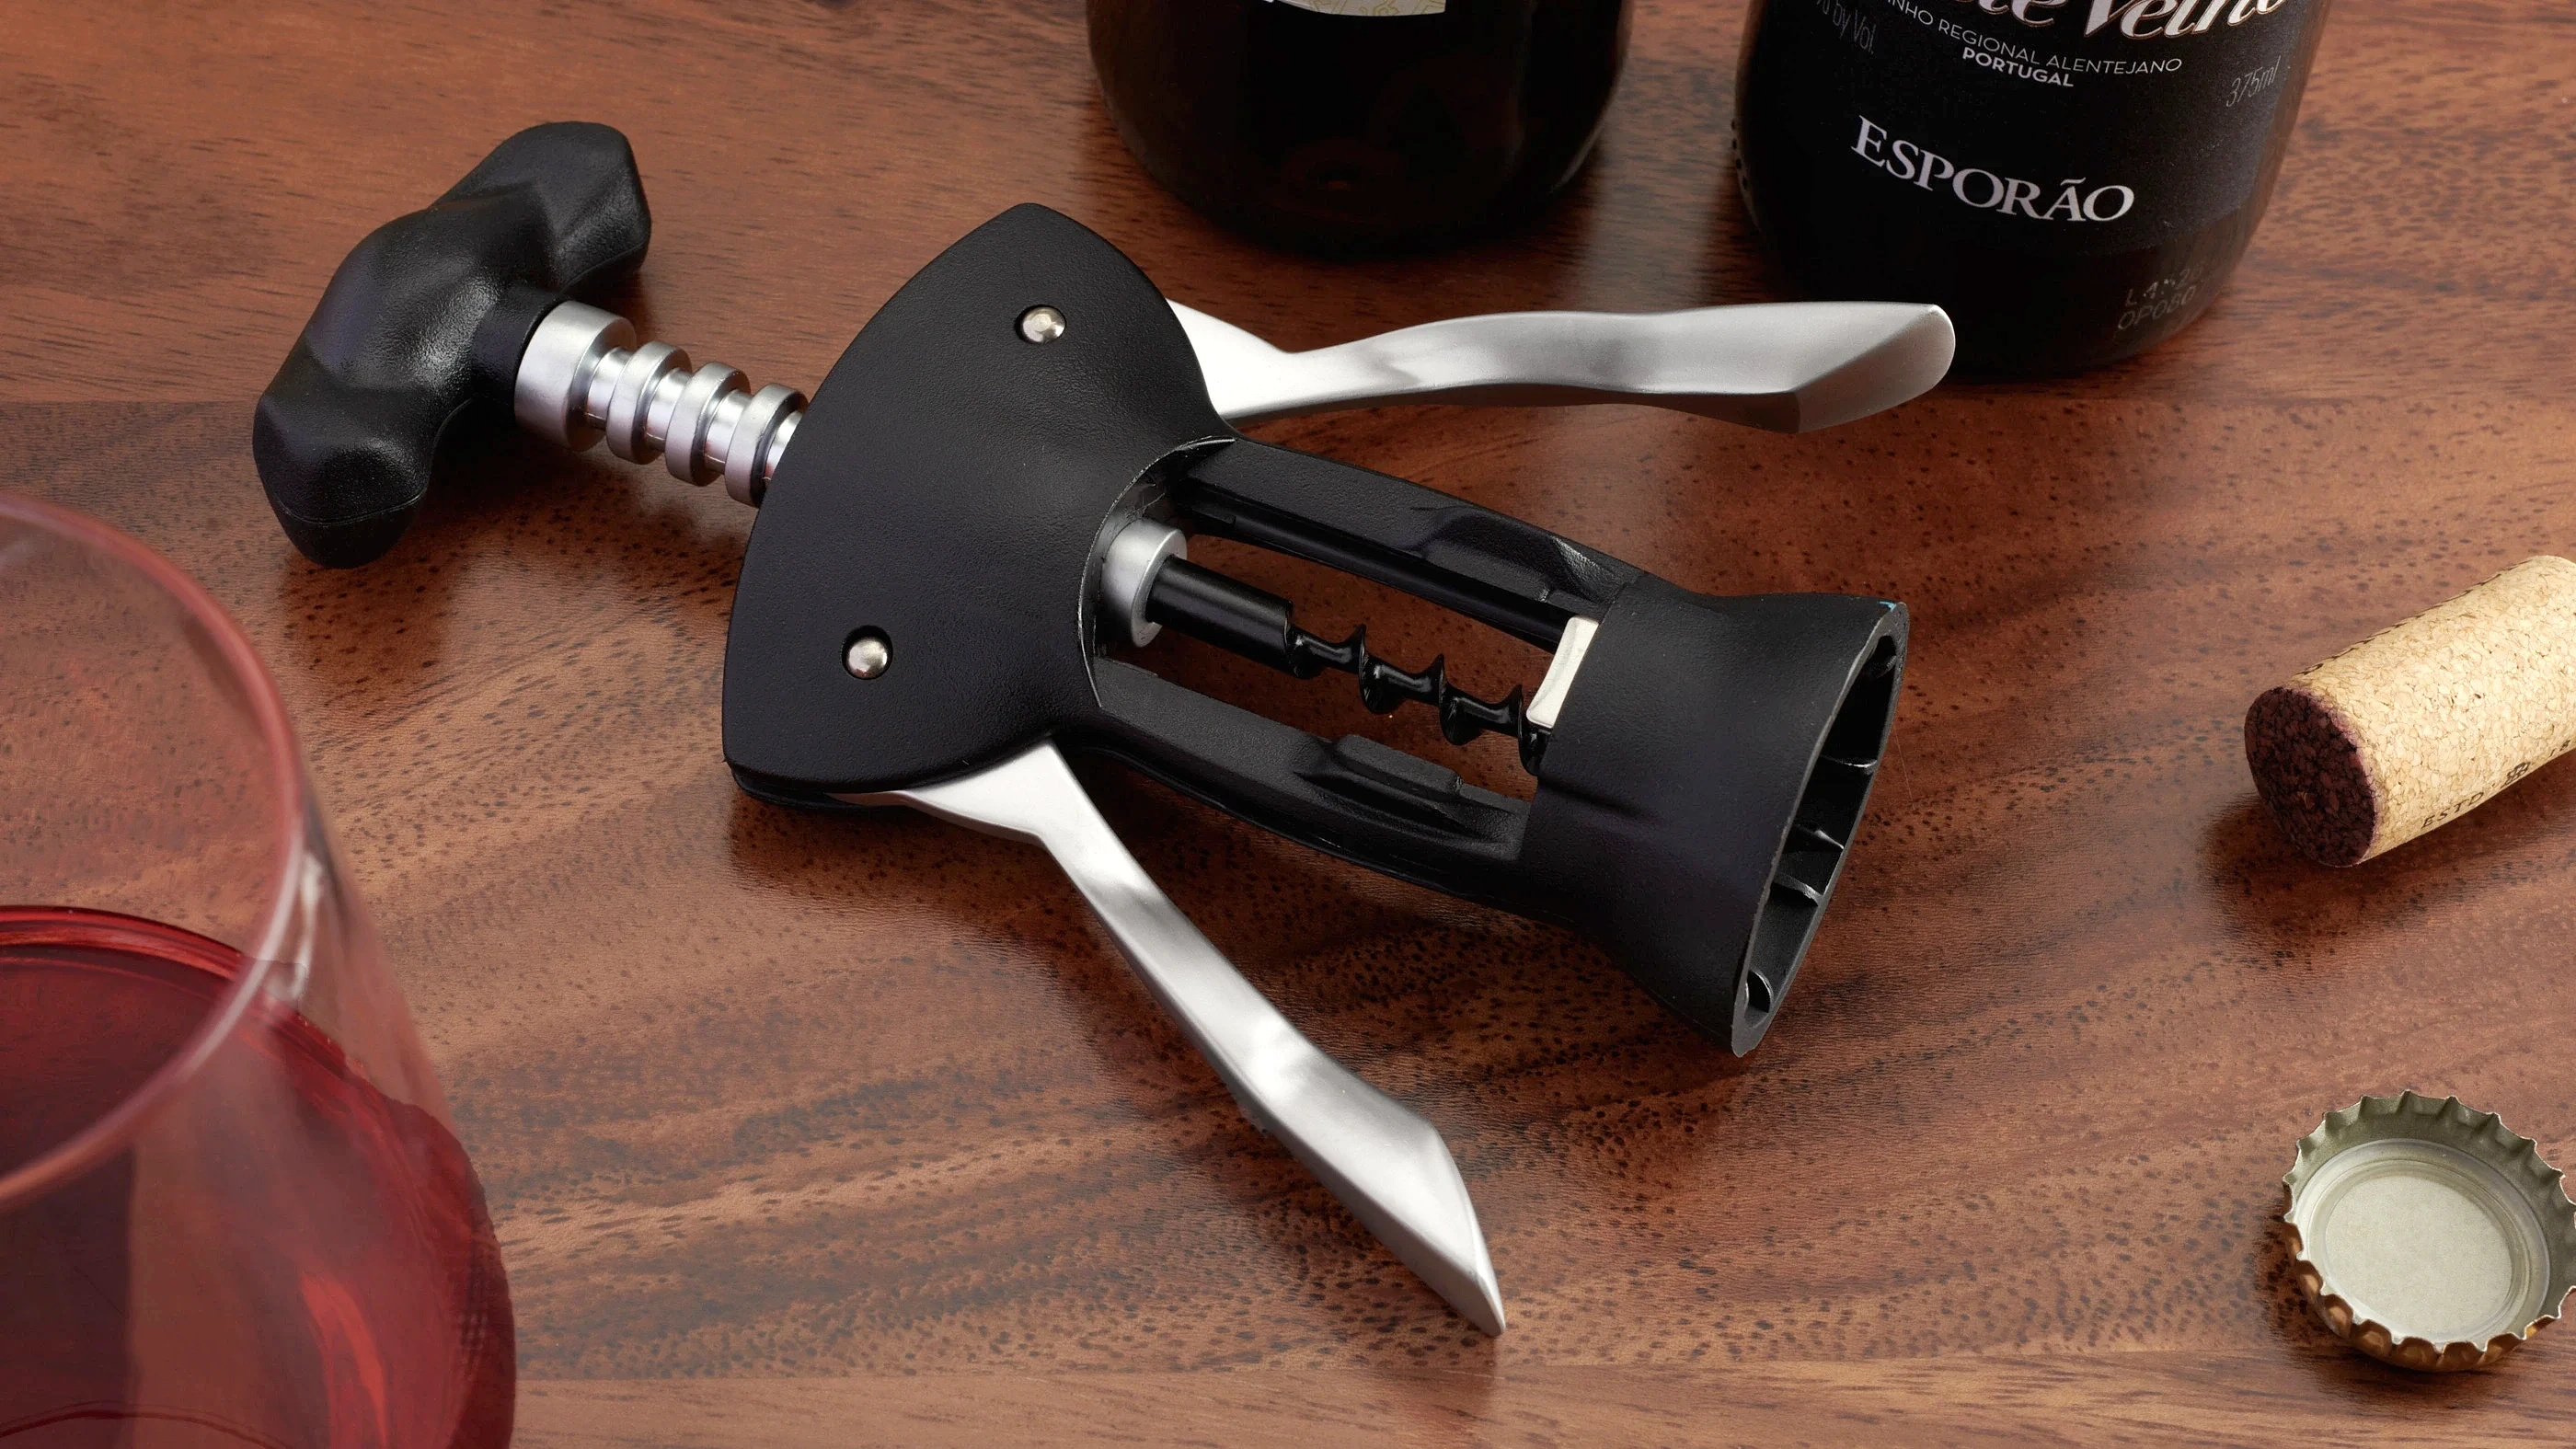 Generic Kitchen Gadgets Topless Can Opener Kitchen Gadgets Wine